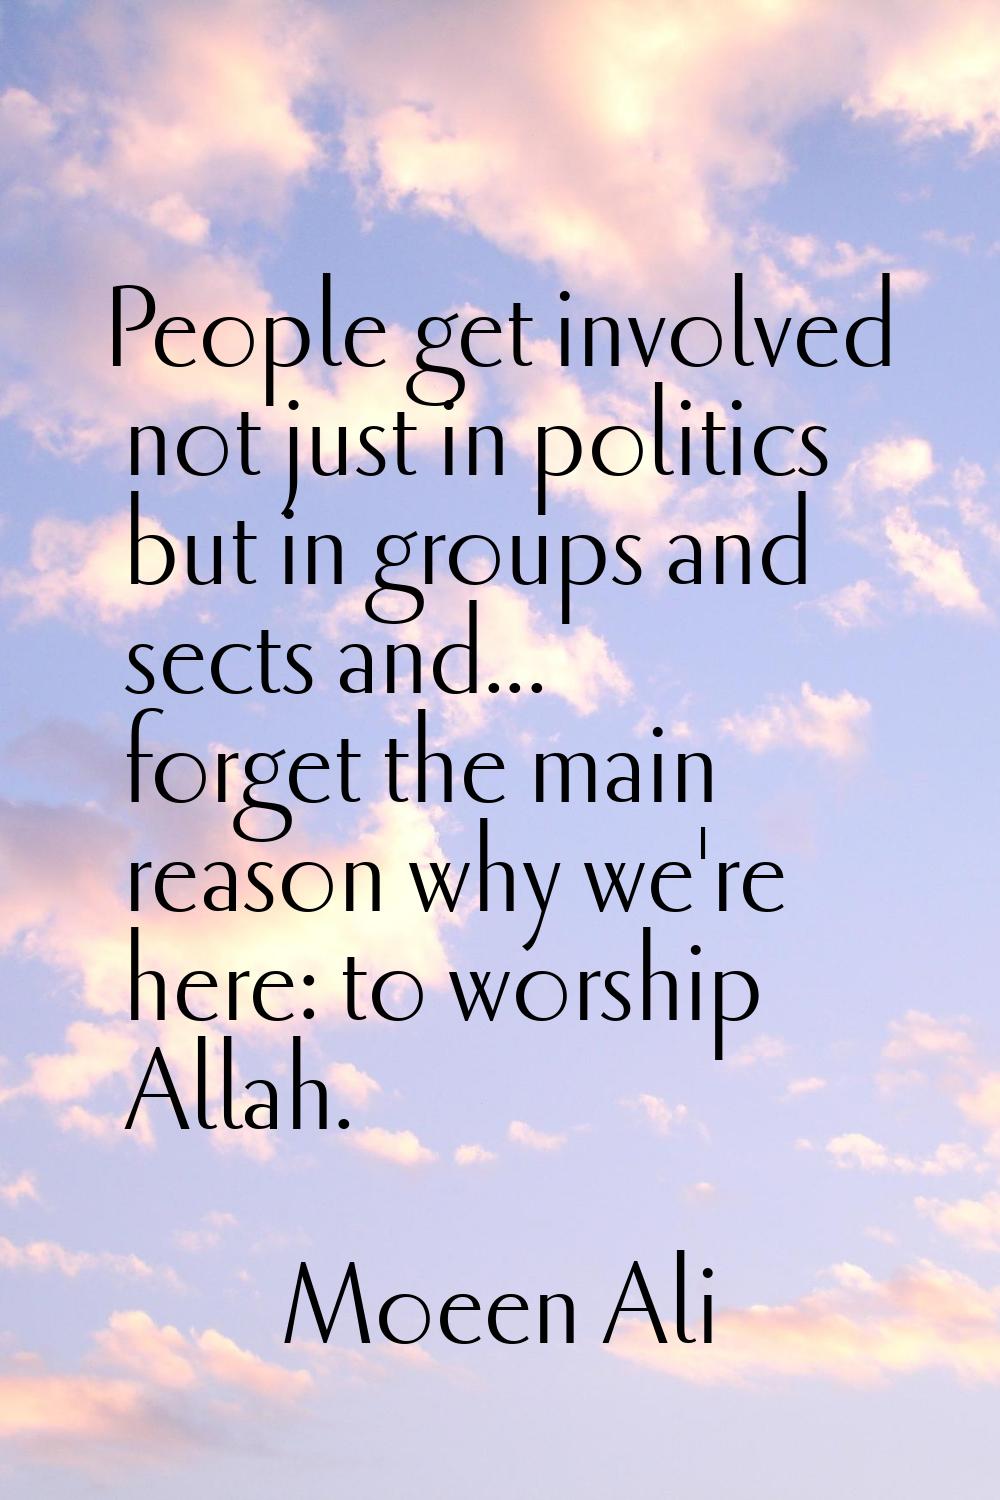 People get involved not just in politics but in groups and sects and... forget the main reason why 